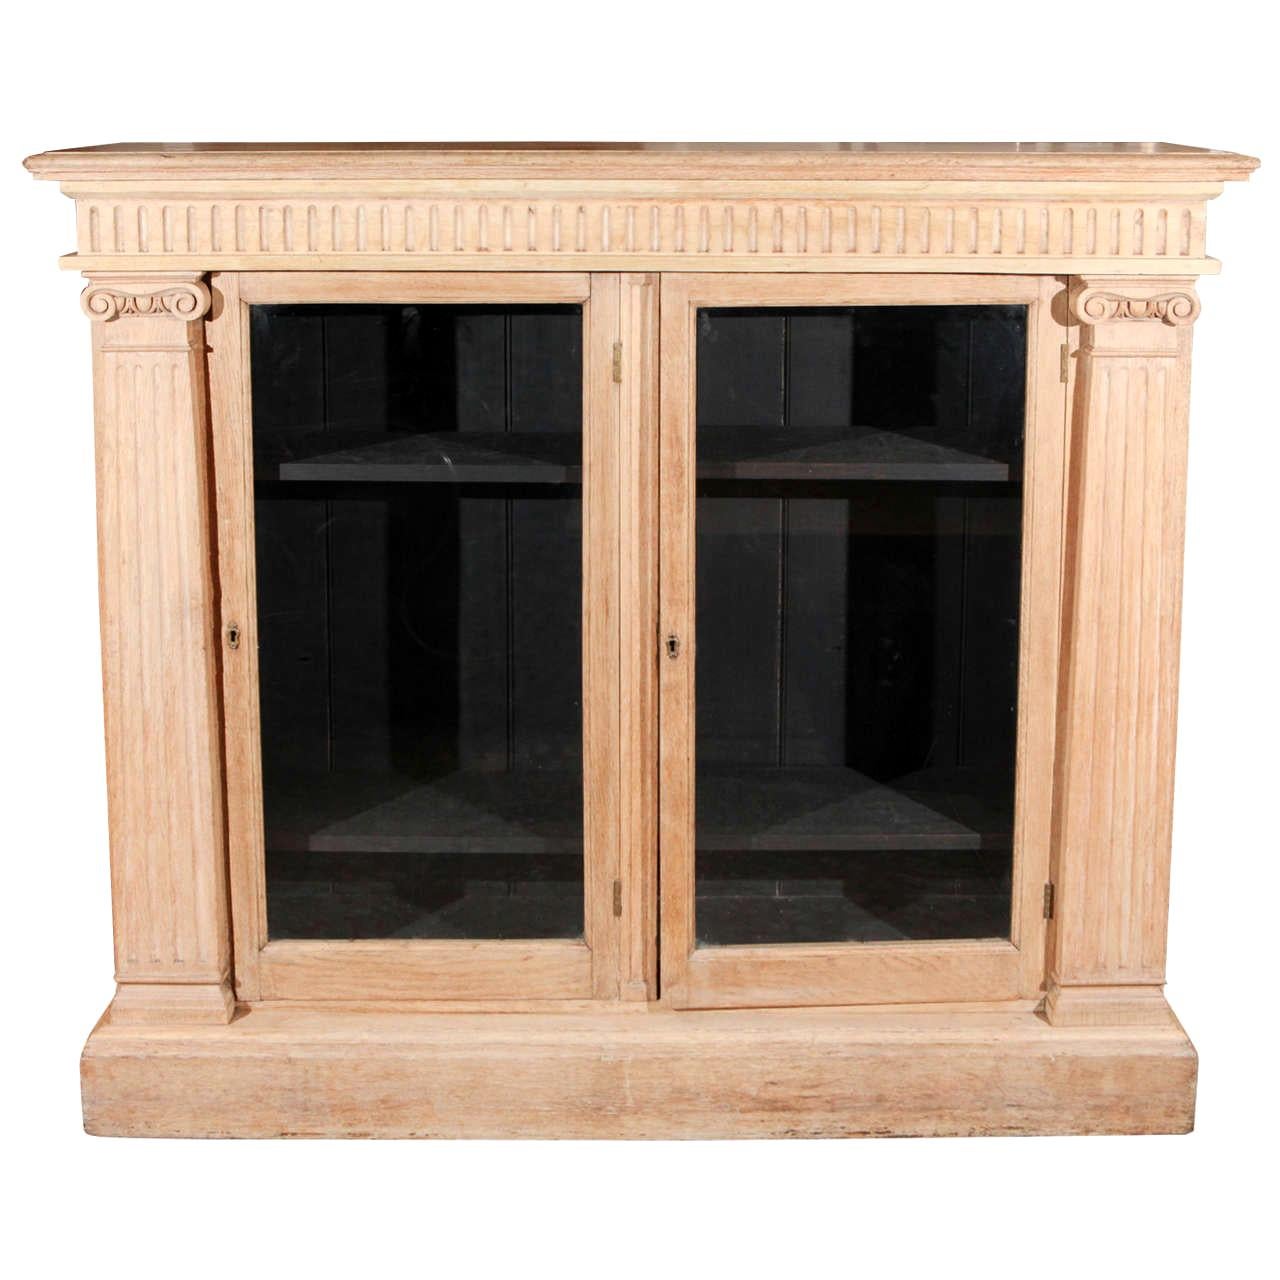 Late 19th Century English Oak Bookcase with Glass Doors